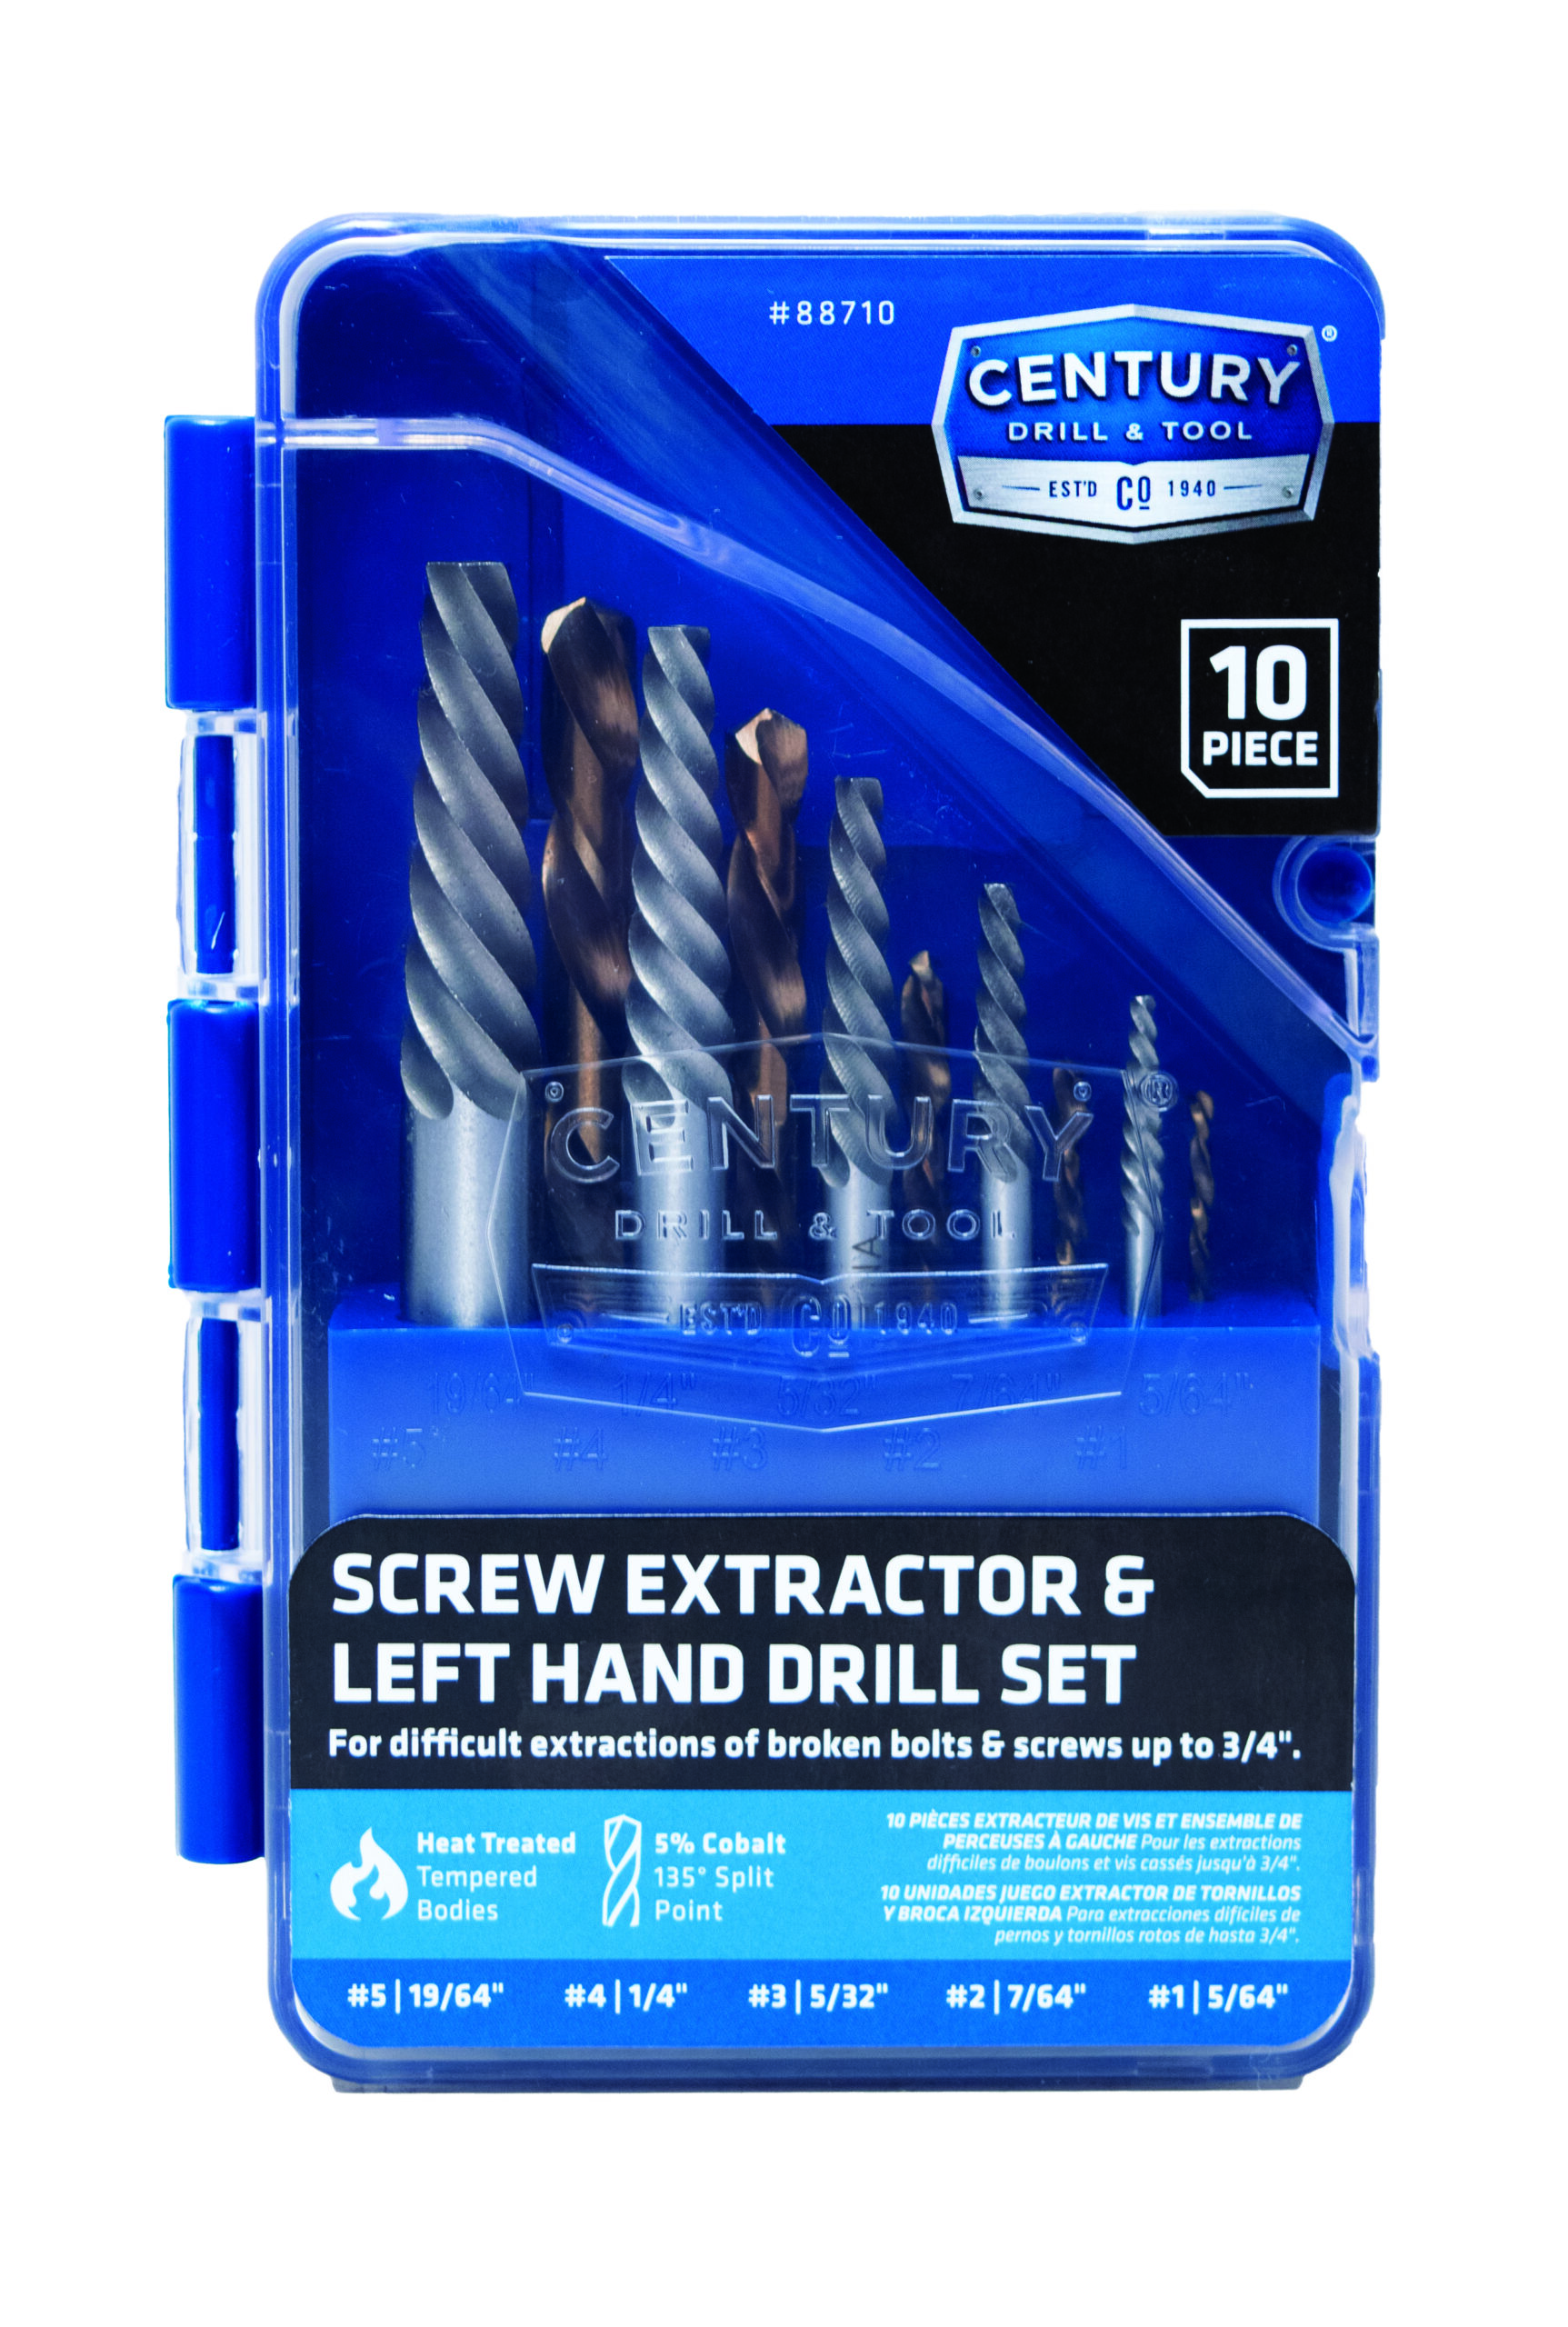 10 Piece Screw Extractor and Drill Bit Set